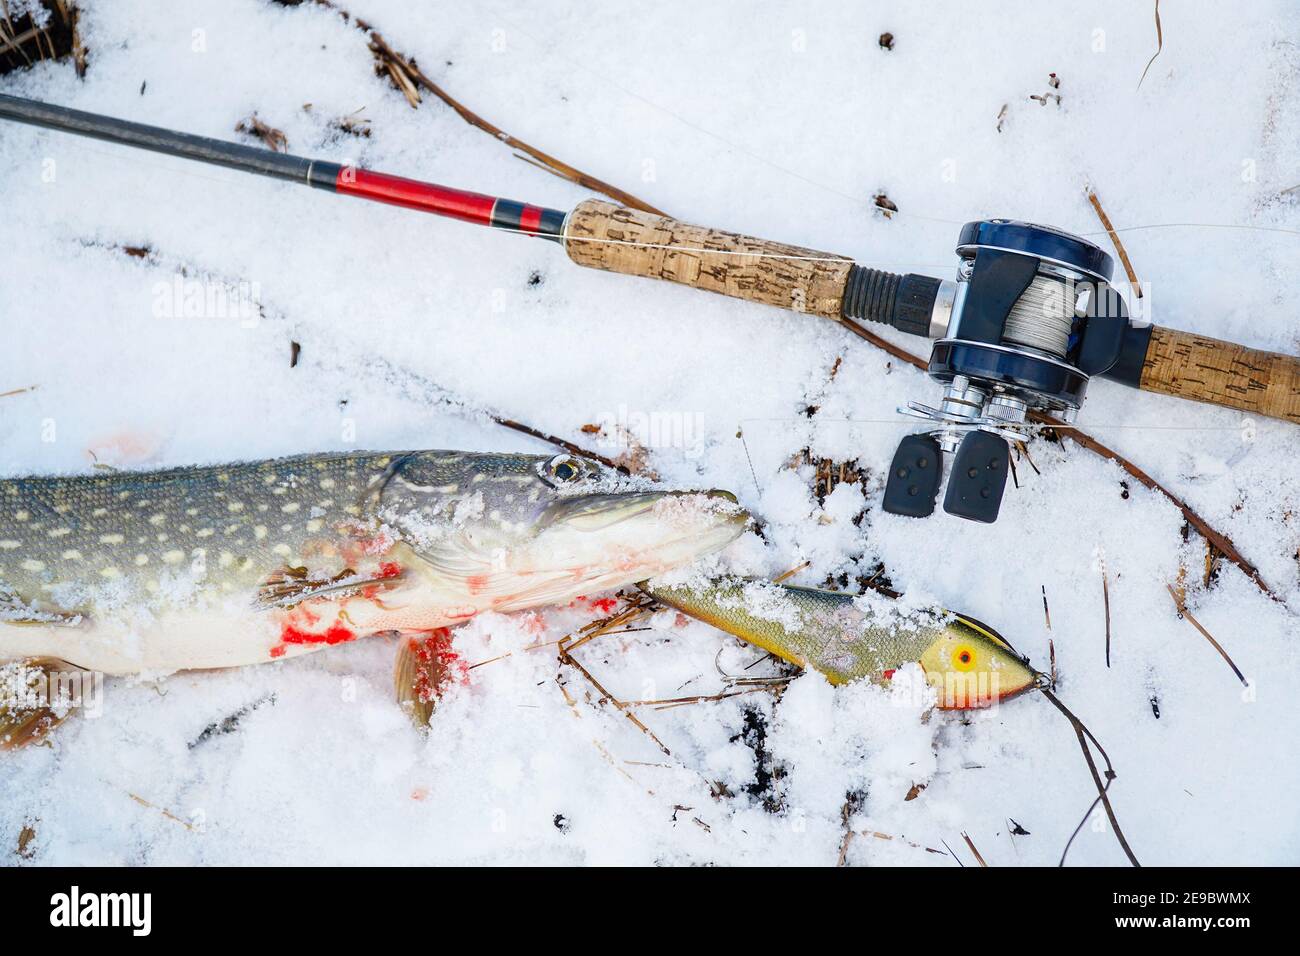 https://c8.alamy.com/comp/2E9BWMX/spinning-rod-with-baitcasting-reel-bait-and-caught-a-pike-lying-on-the-snow-in-the-winter-2E9BWMX.jpg